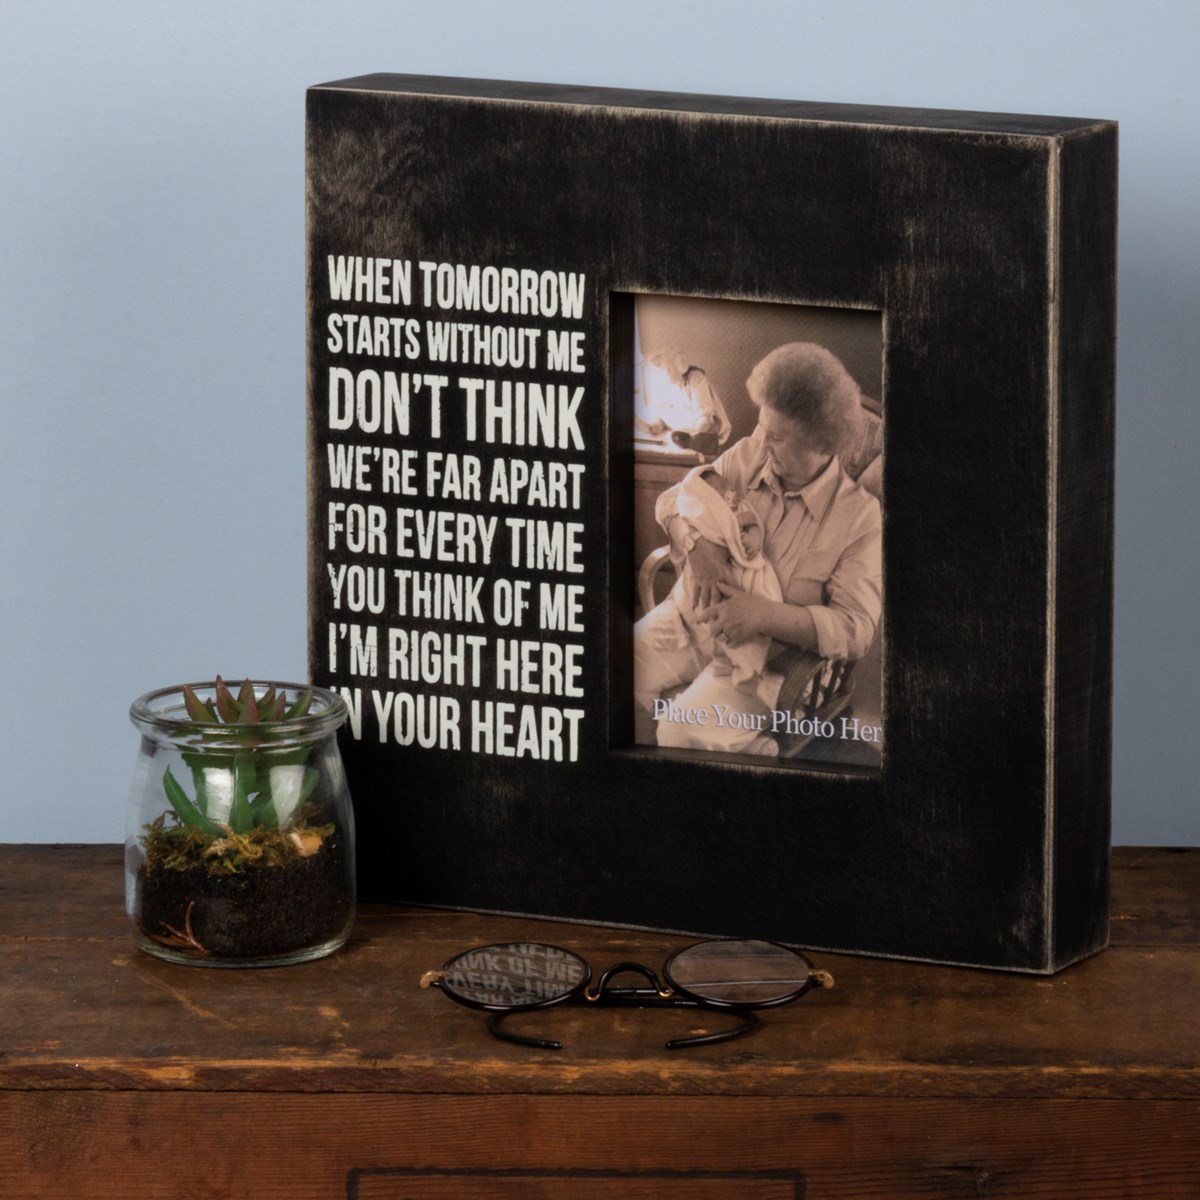 Box Frame - In Your Heart - 10" x 10" x 2", Fits 4" x 6" Photo - Wood, Glass